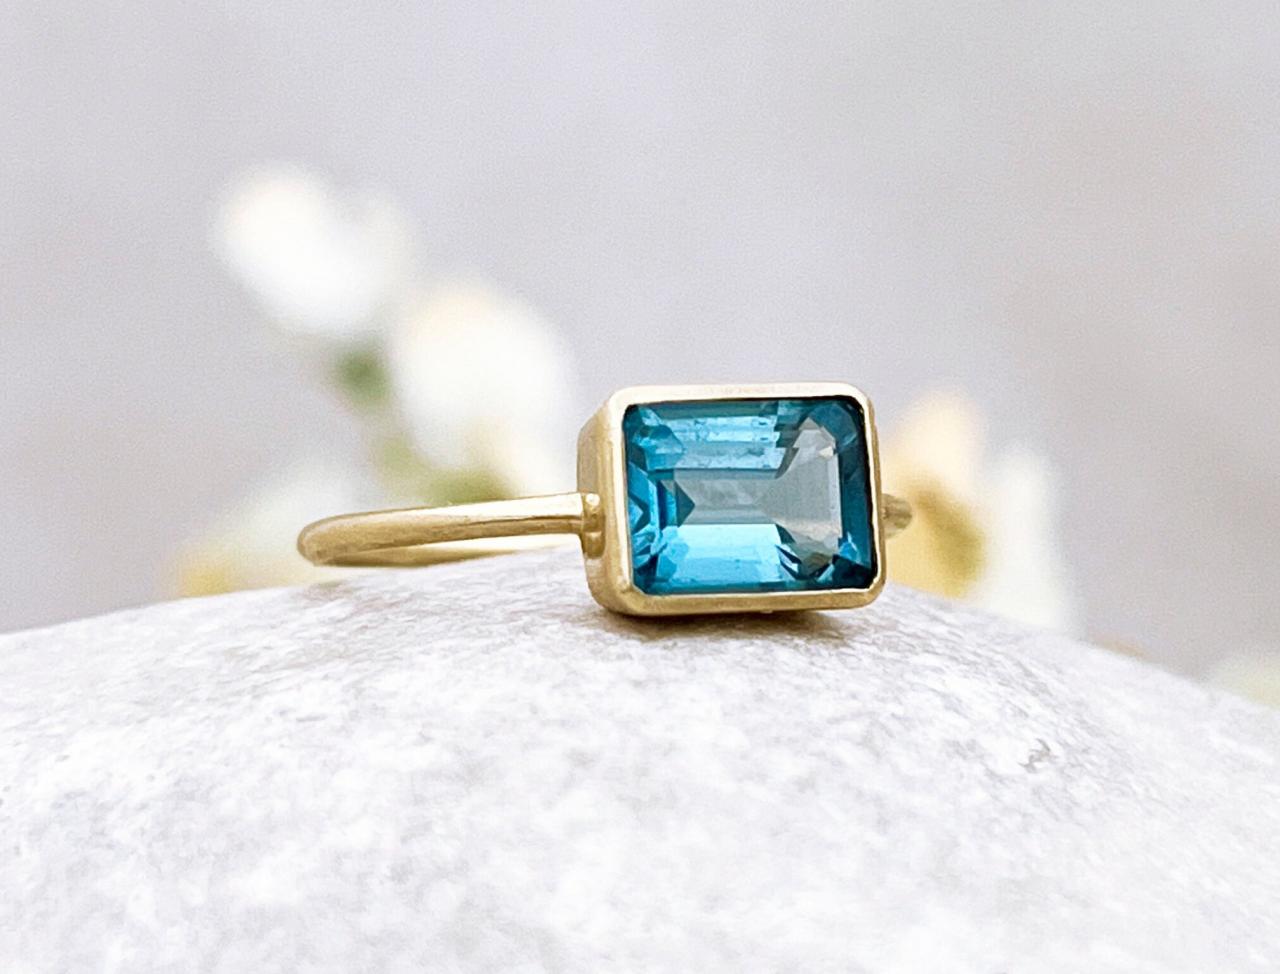 Gold engagement ring with emerald cut London blue topaz, Solitaire natural blue gemstone wedding ring, 18k dainty bezel set ring